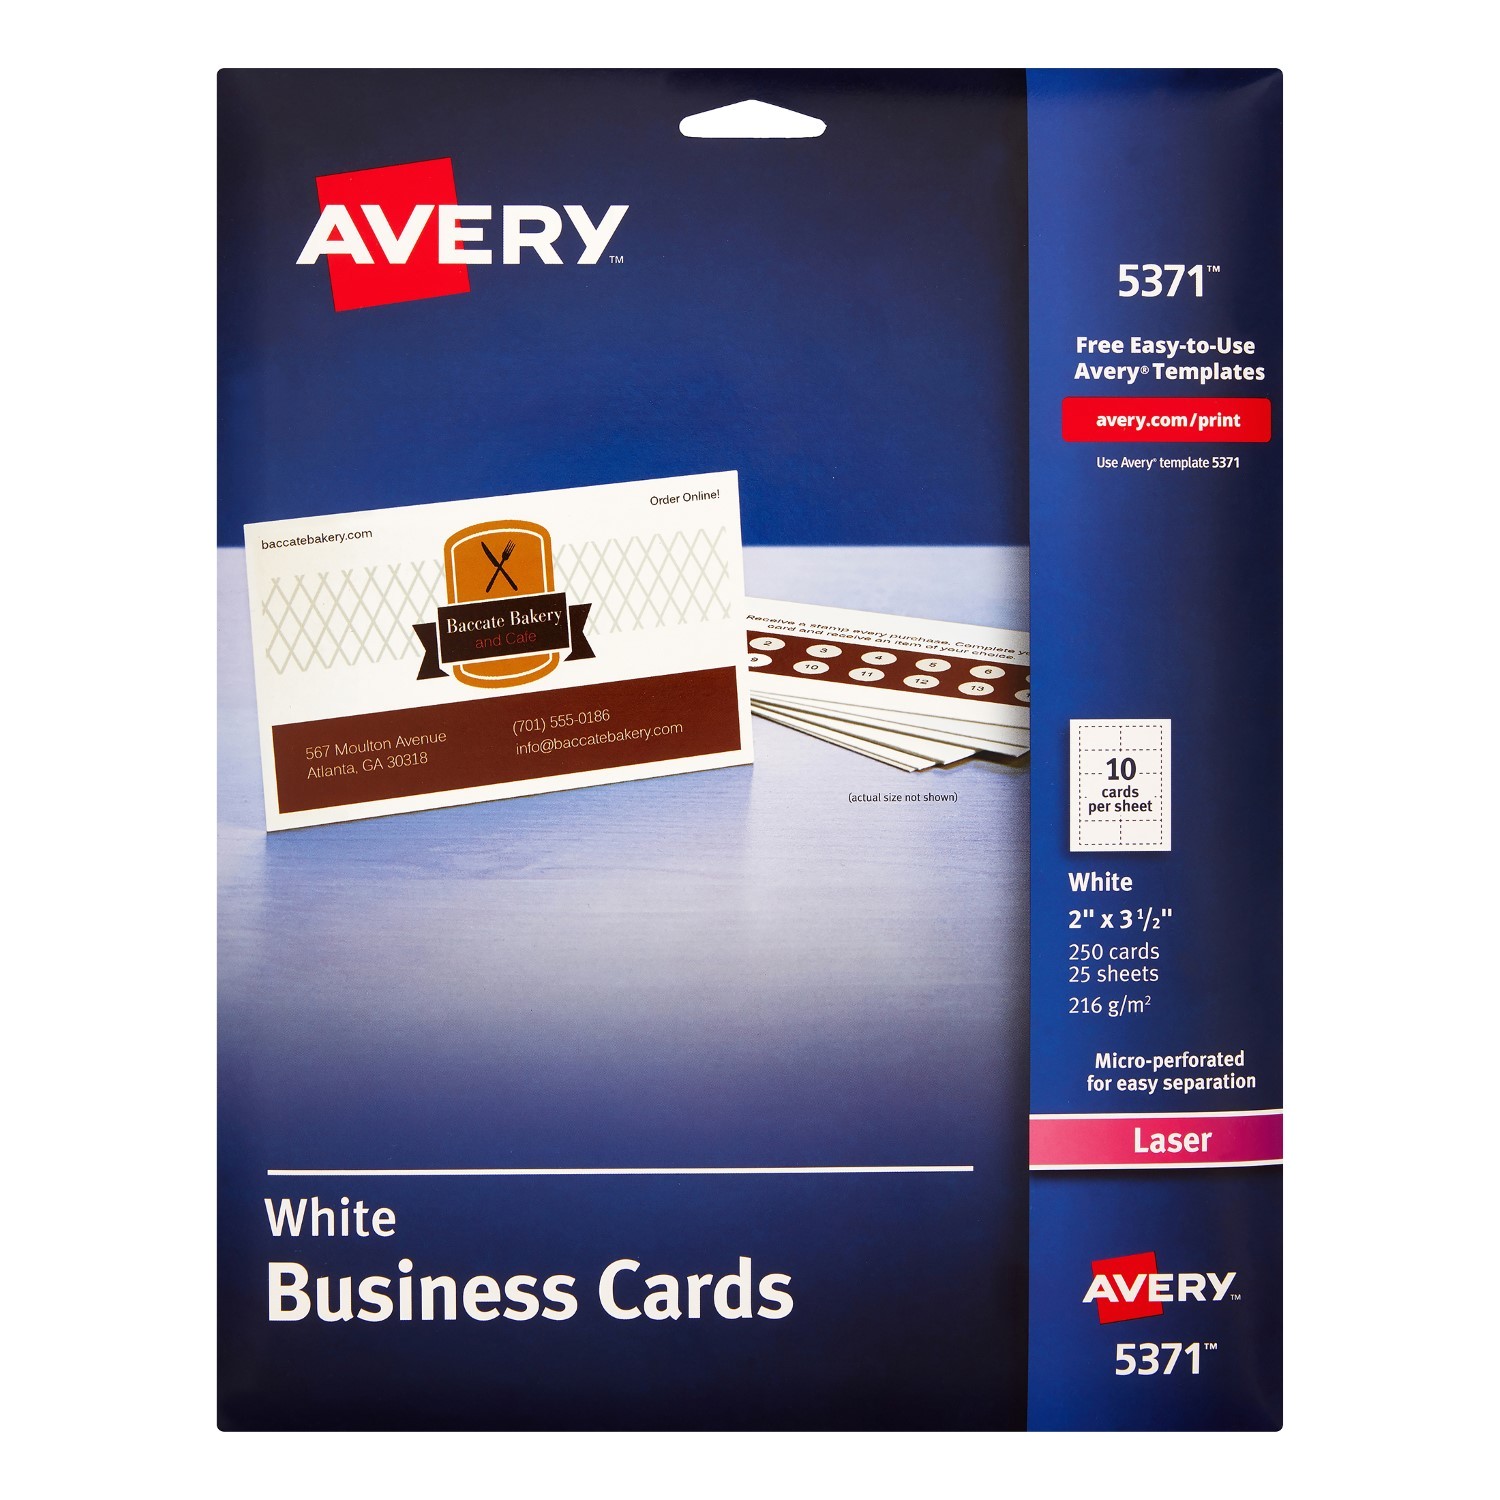 How To Use Avery Business Card Templates In Word Williamson ga us